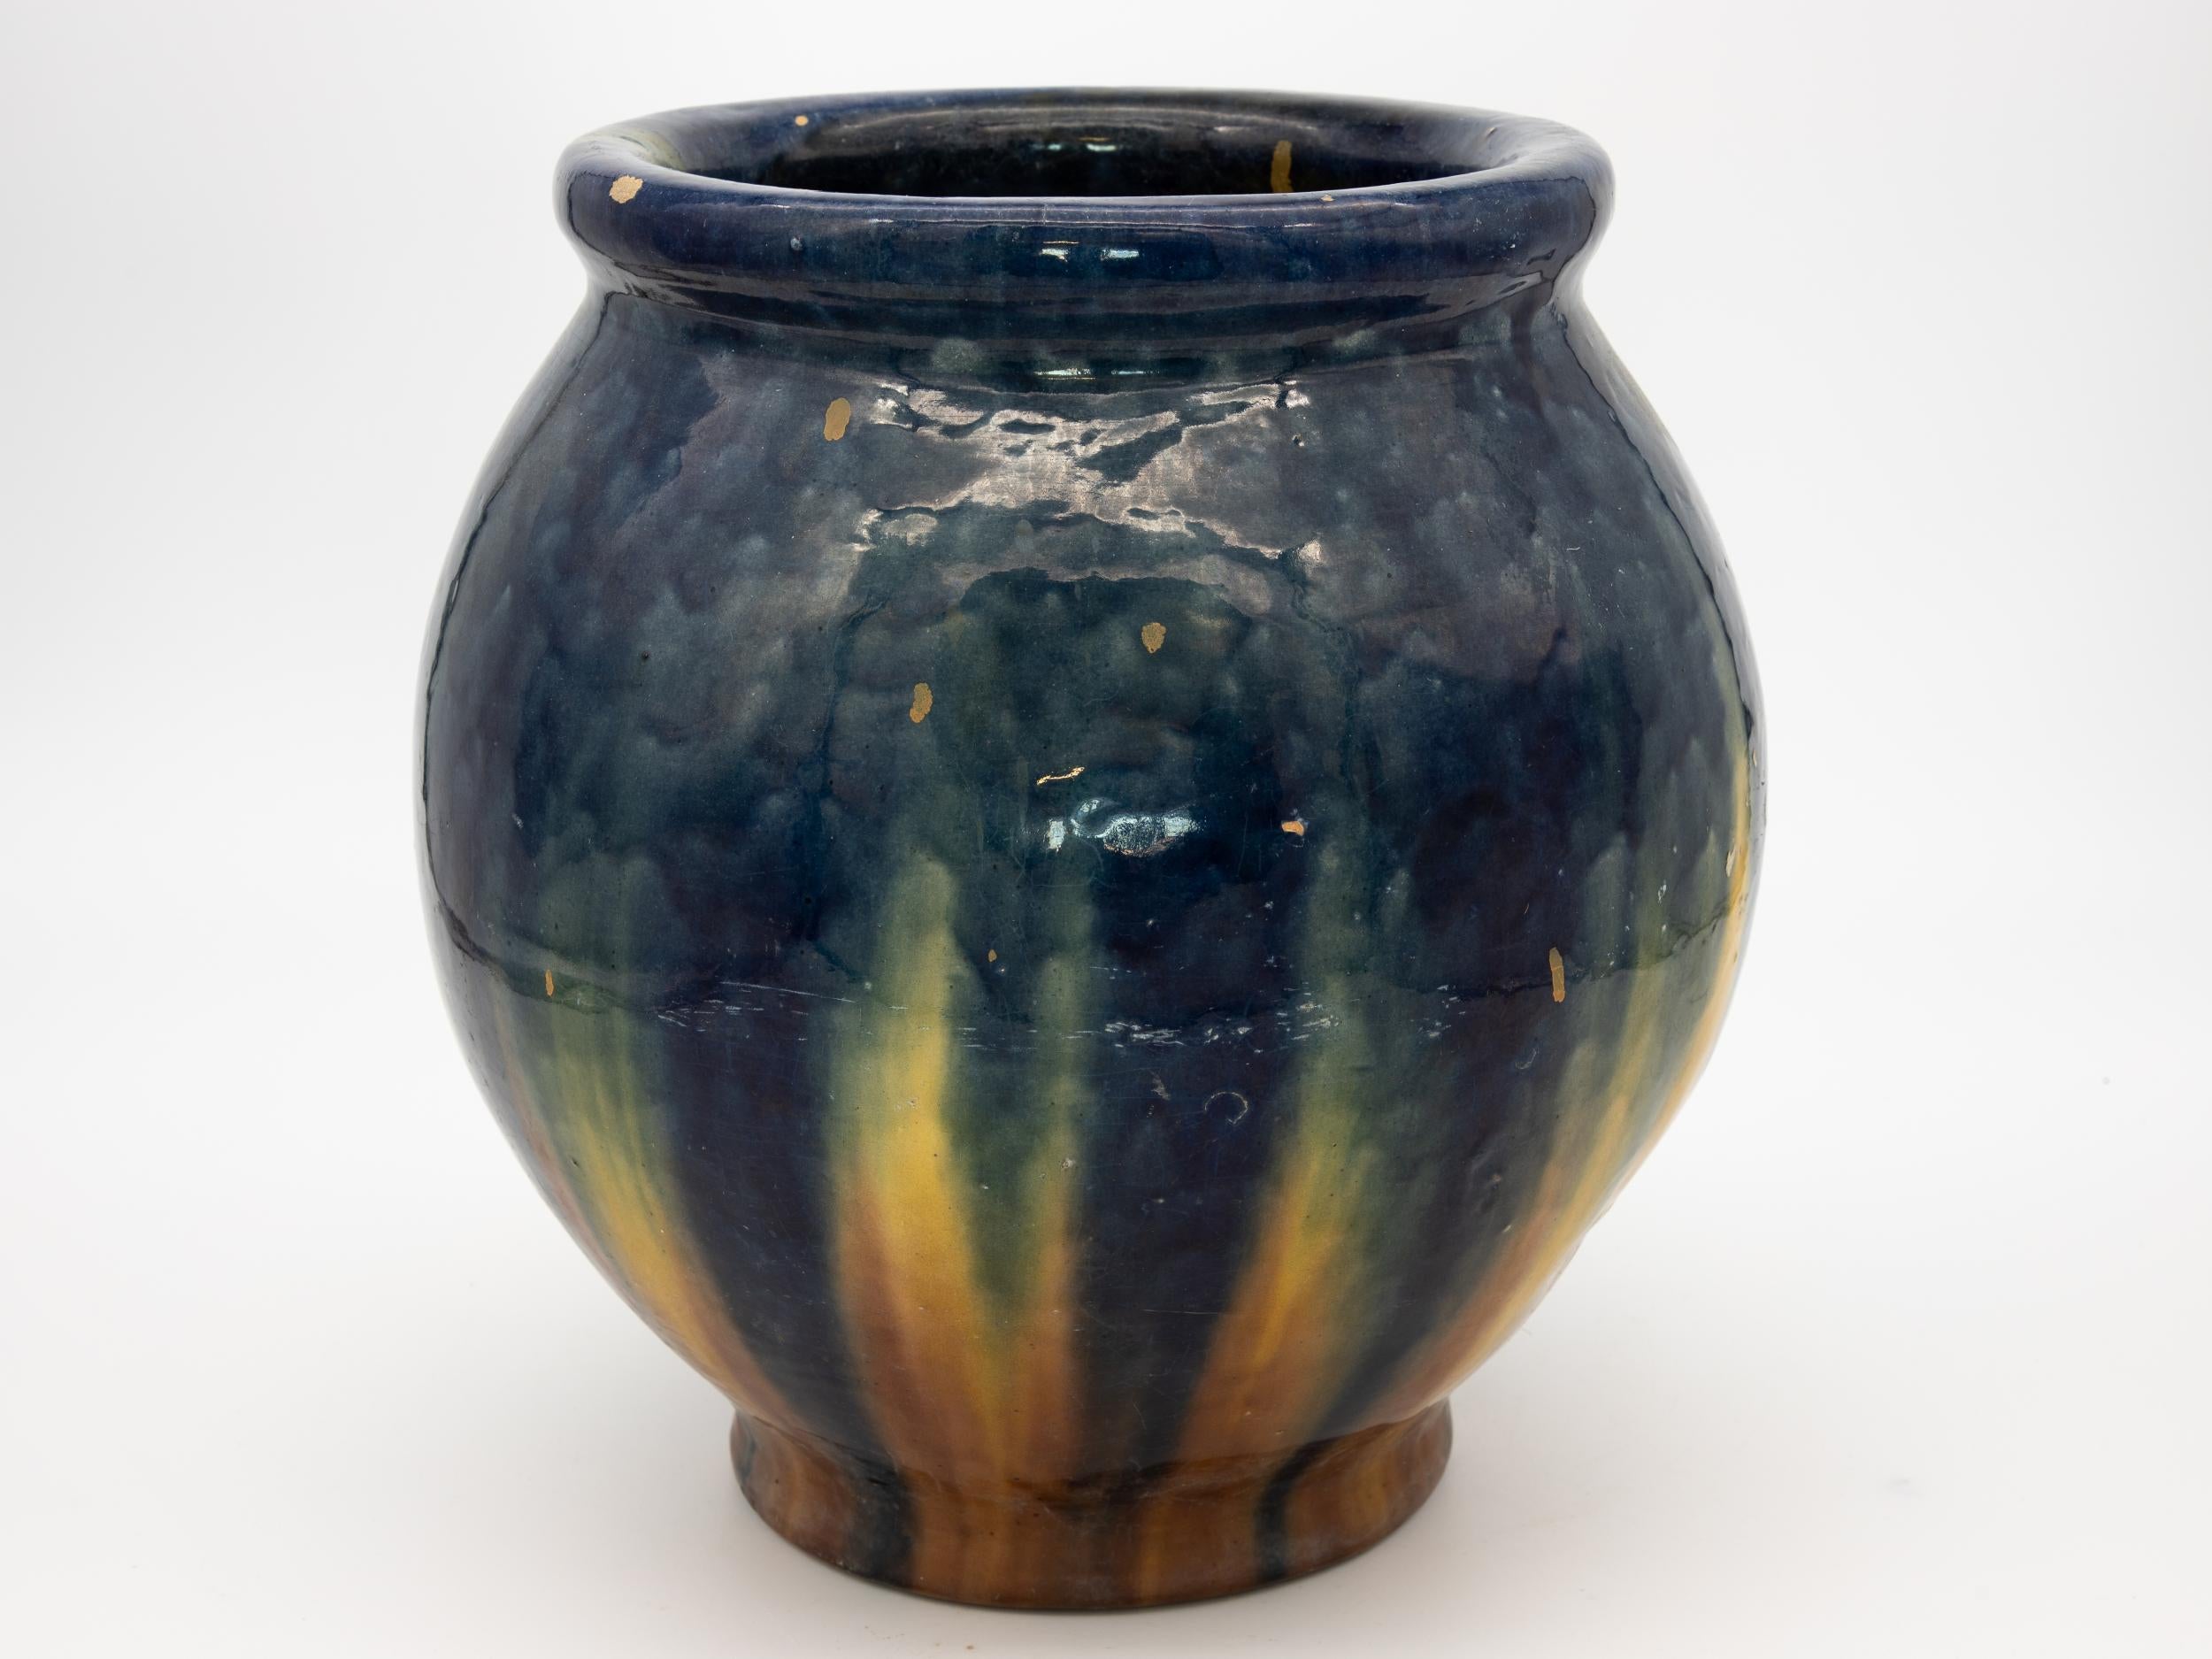 Oversized ceramic vase with blue & cream glaze, beautiful weight and thickness.